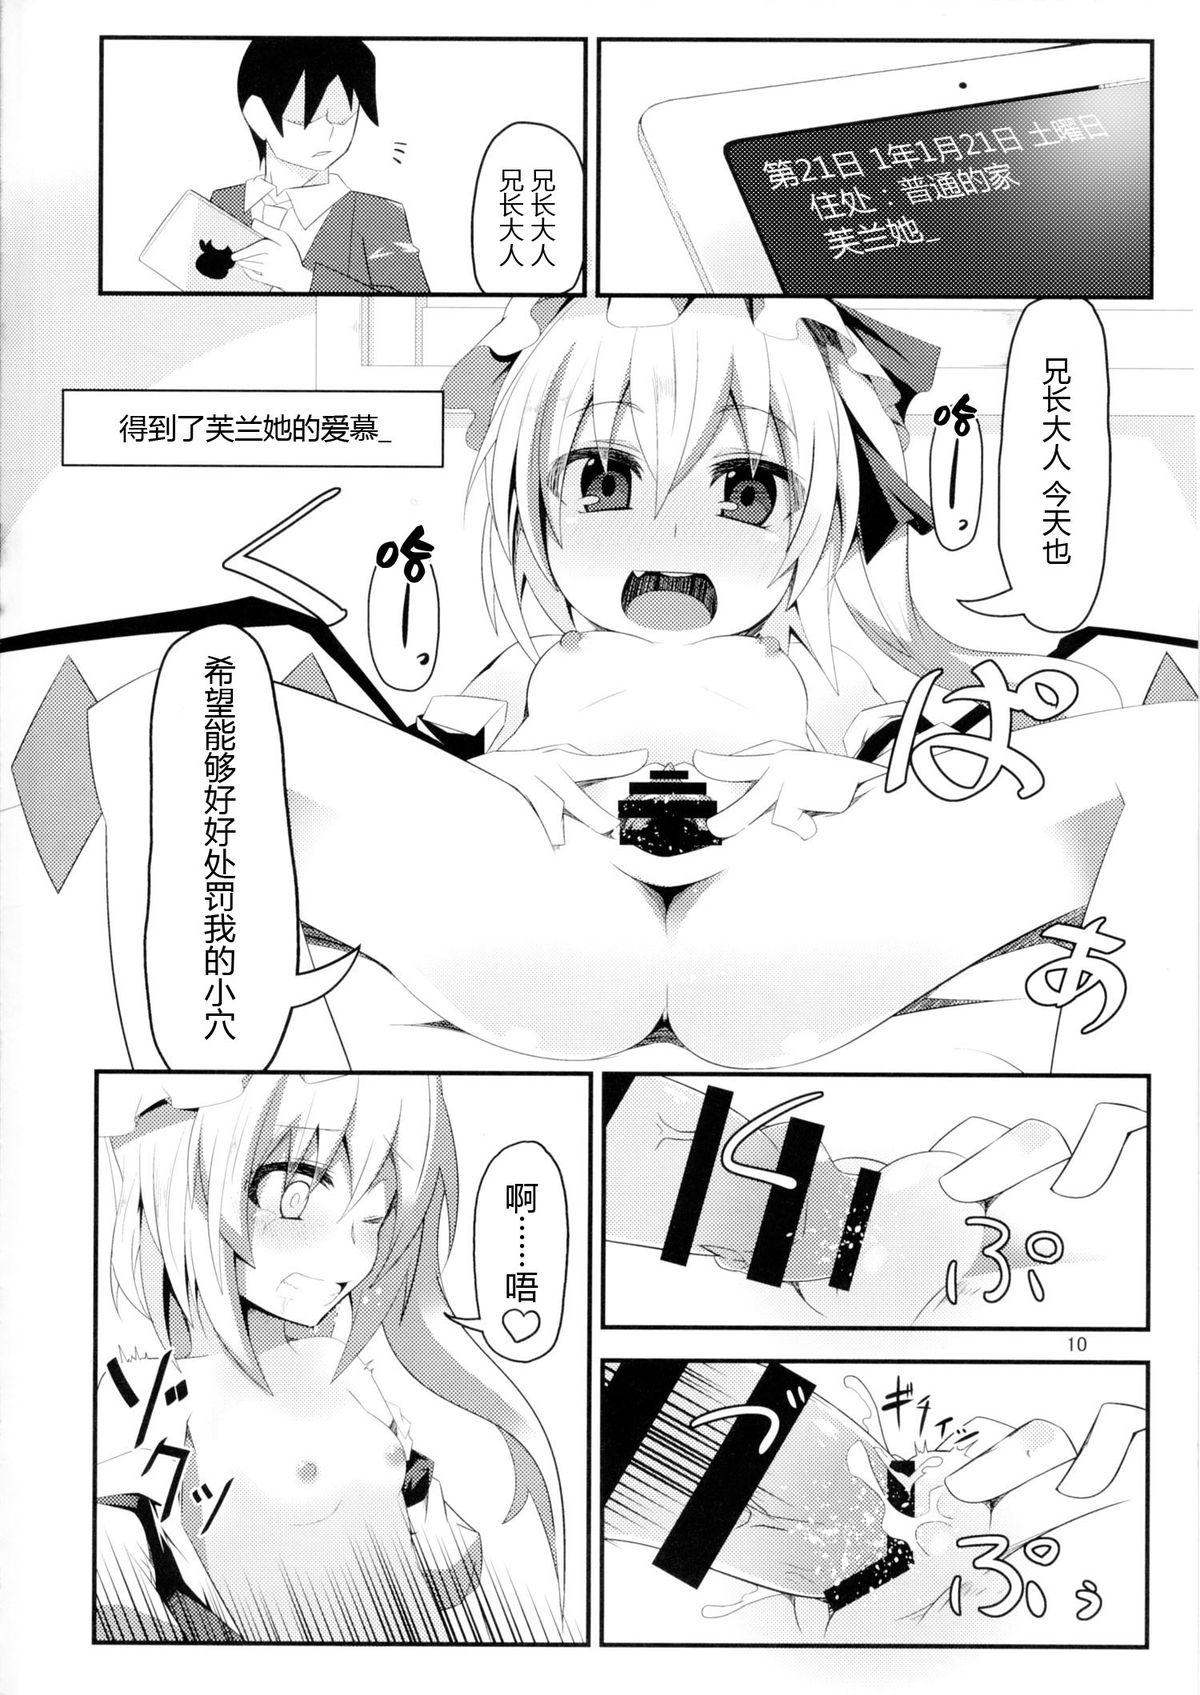 Japanese er@Flan - Touhou project Athletic - Page 10